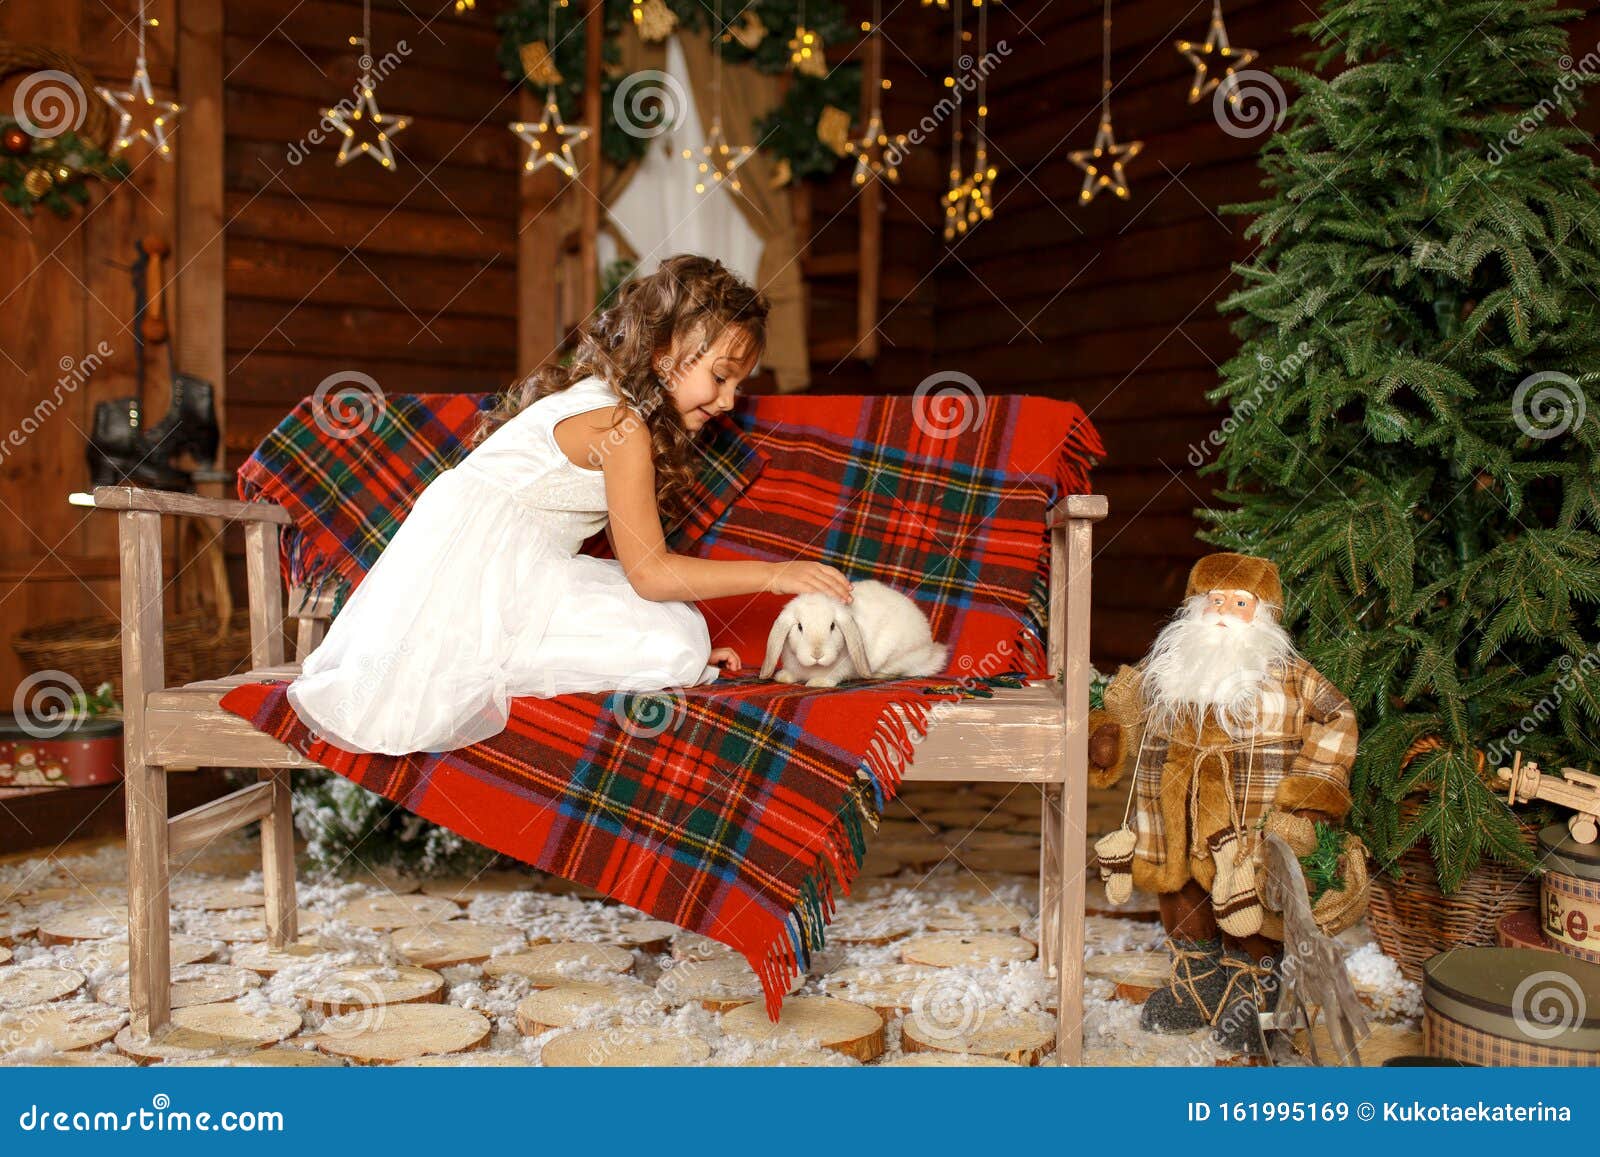 New Year 2020. Merry Christmas, Happy Holidays. A Little Girl In White Dress Sitting On The ...